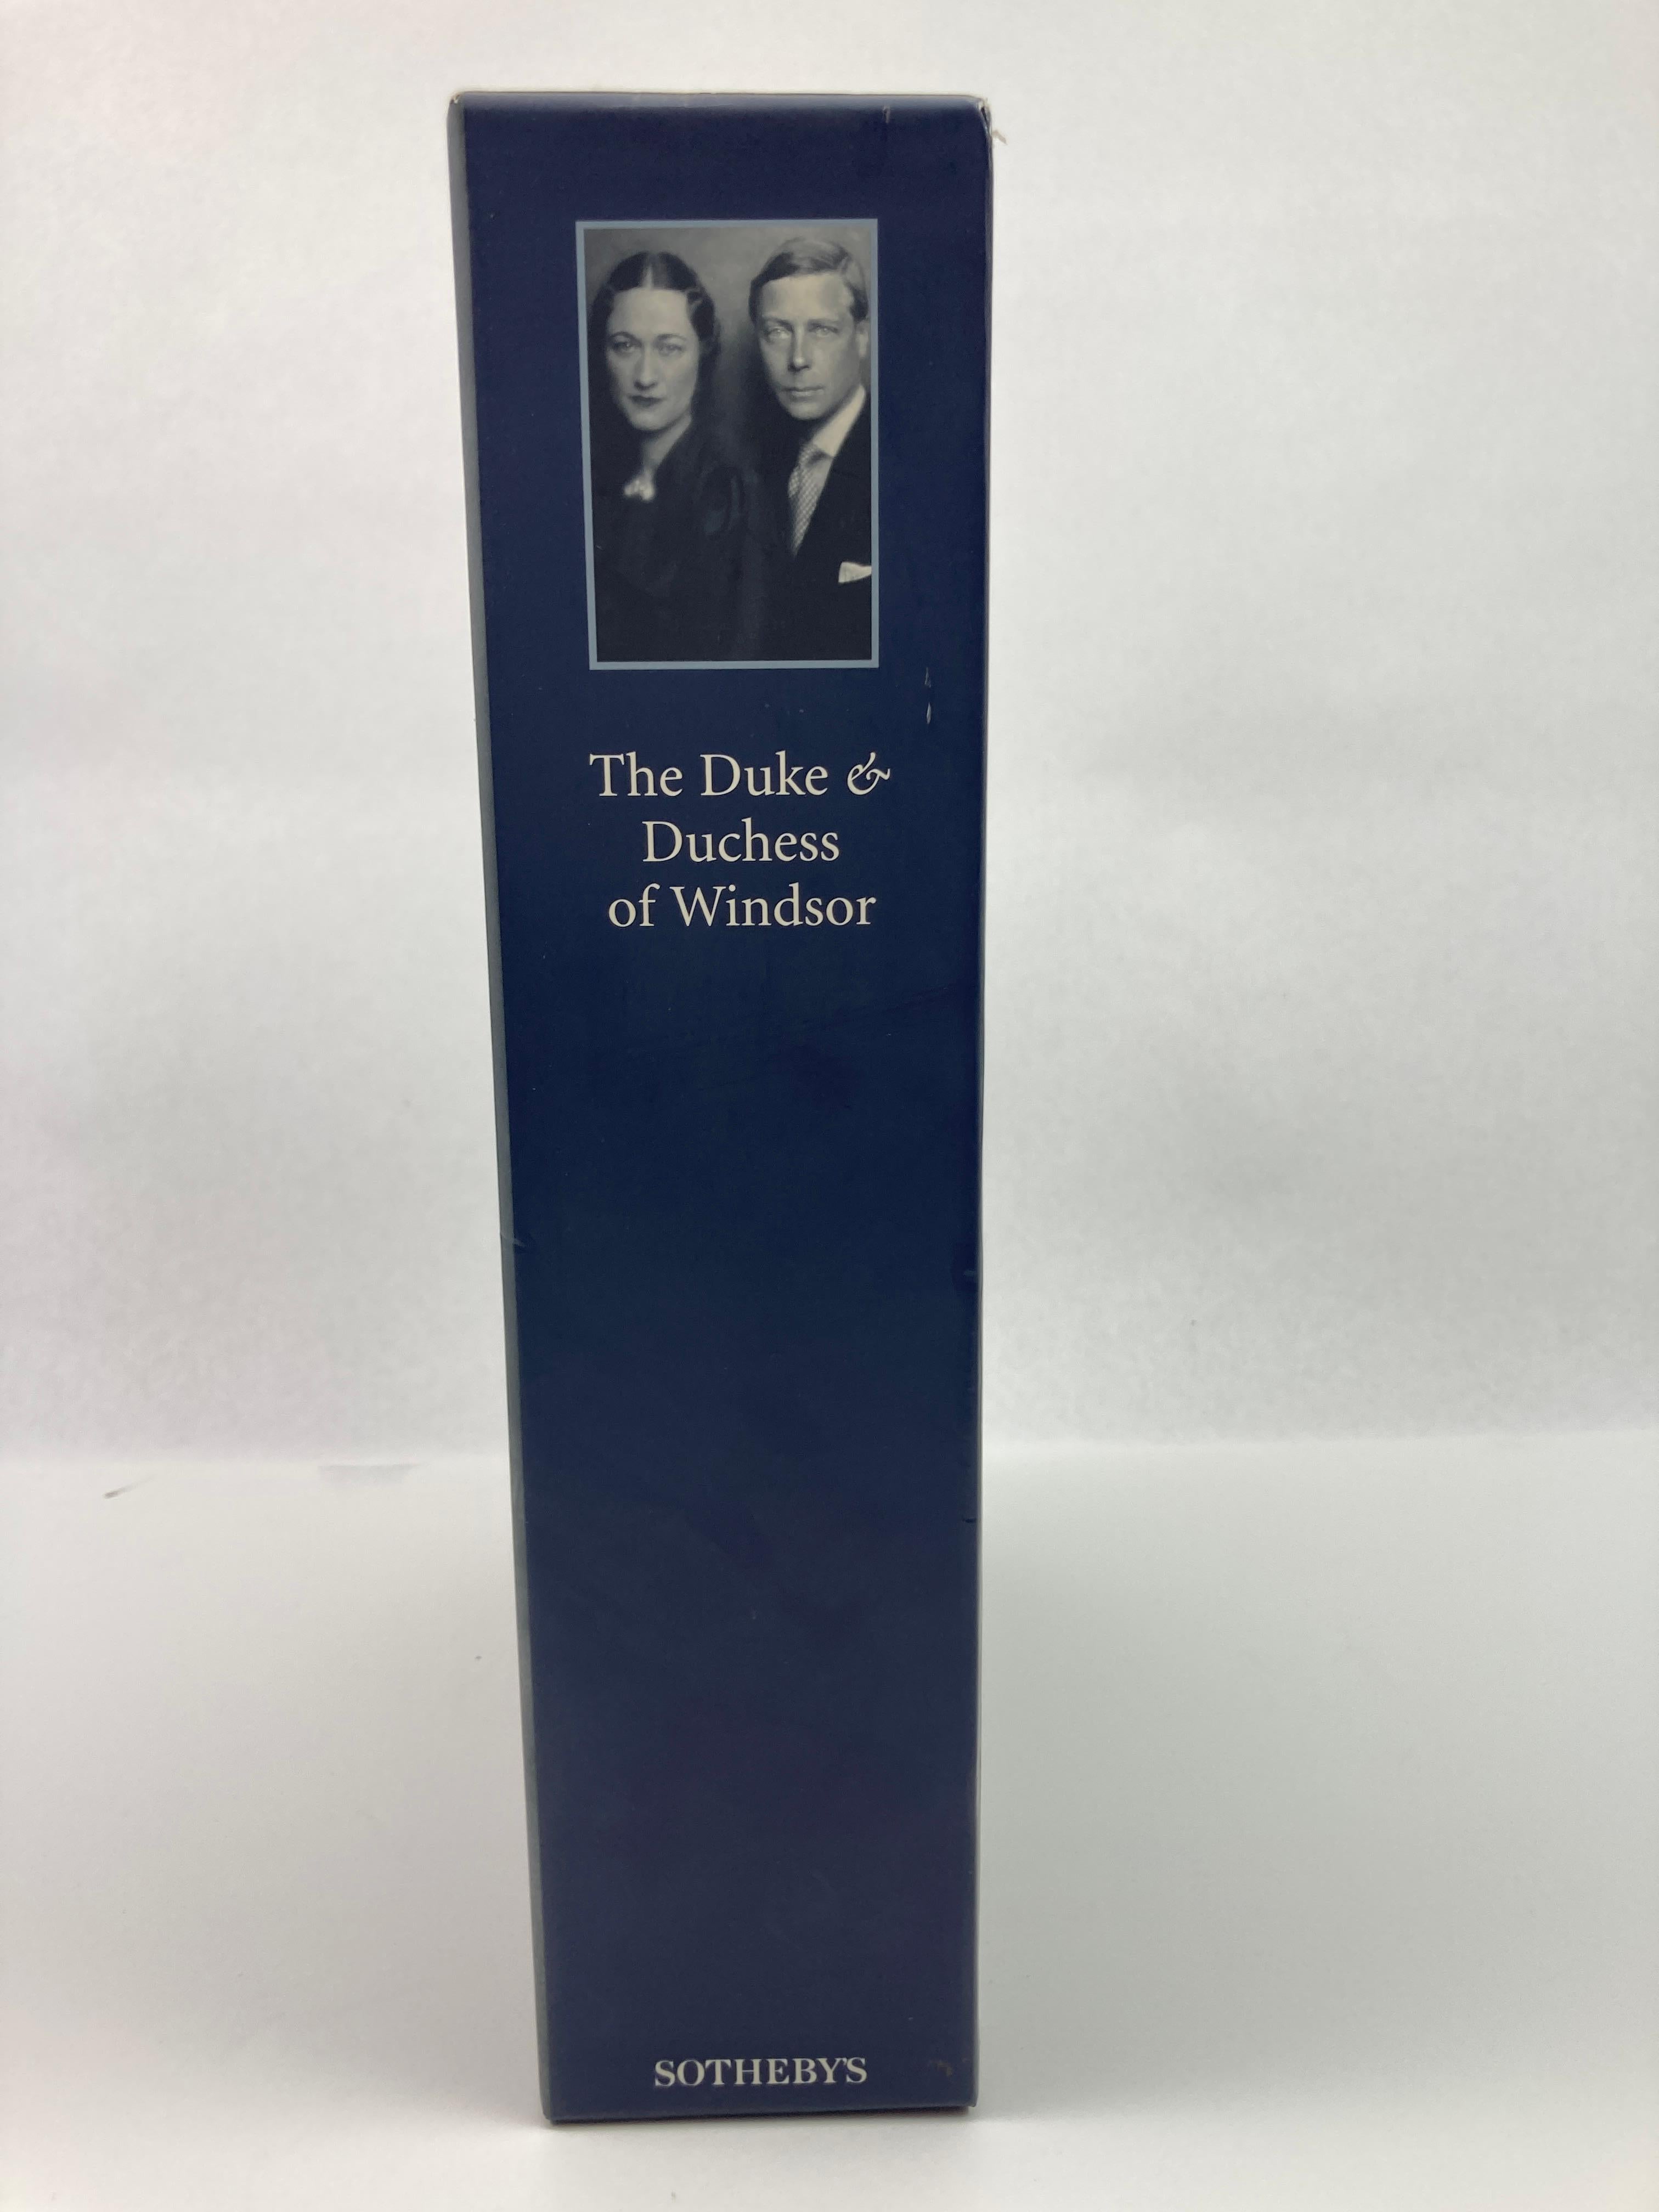 The Duke and Duchess of Windsor Auction Sothebys Books Catalogs in Slipcase Box In Good Condition For Sale In North Hollywood, CA